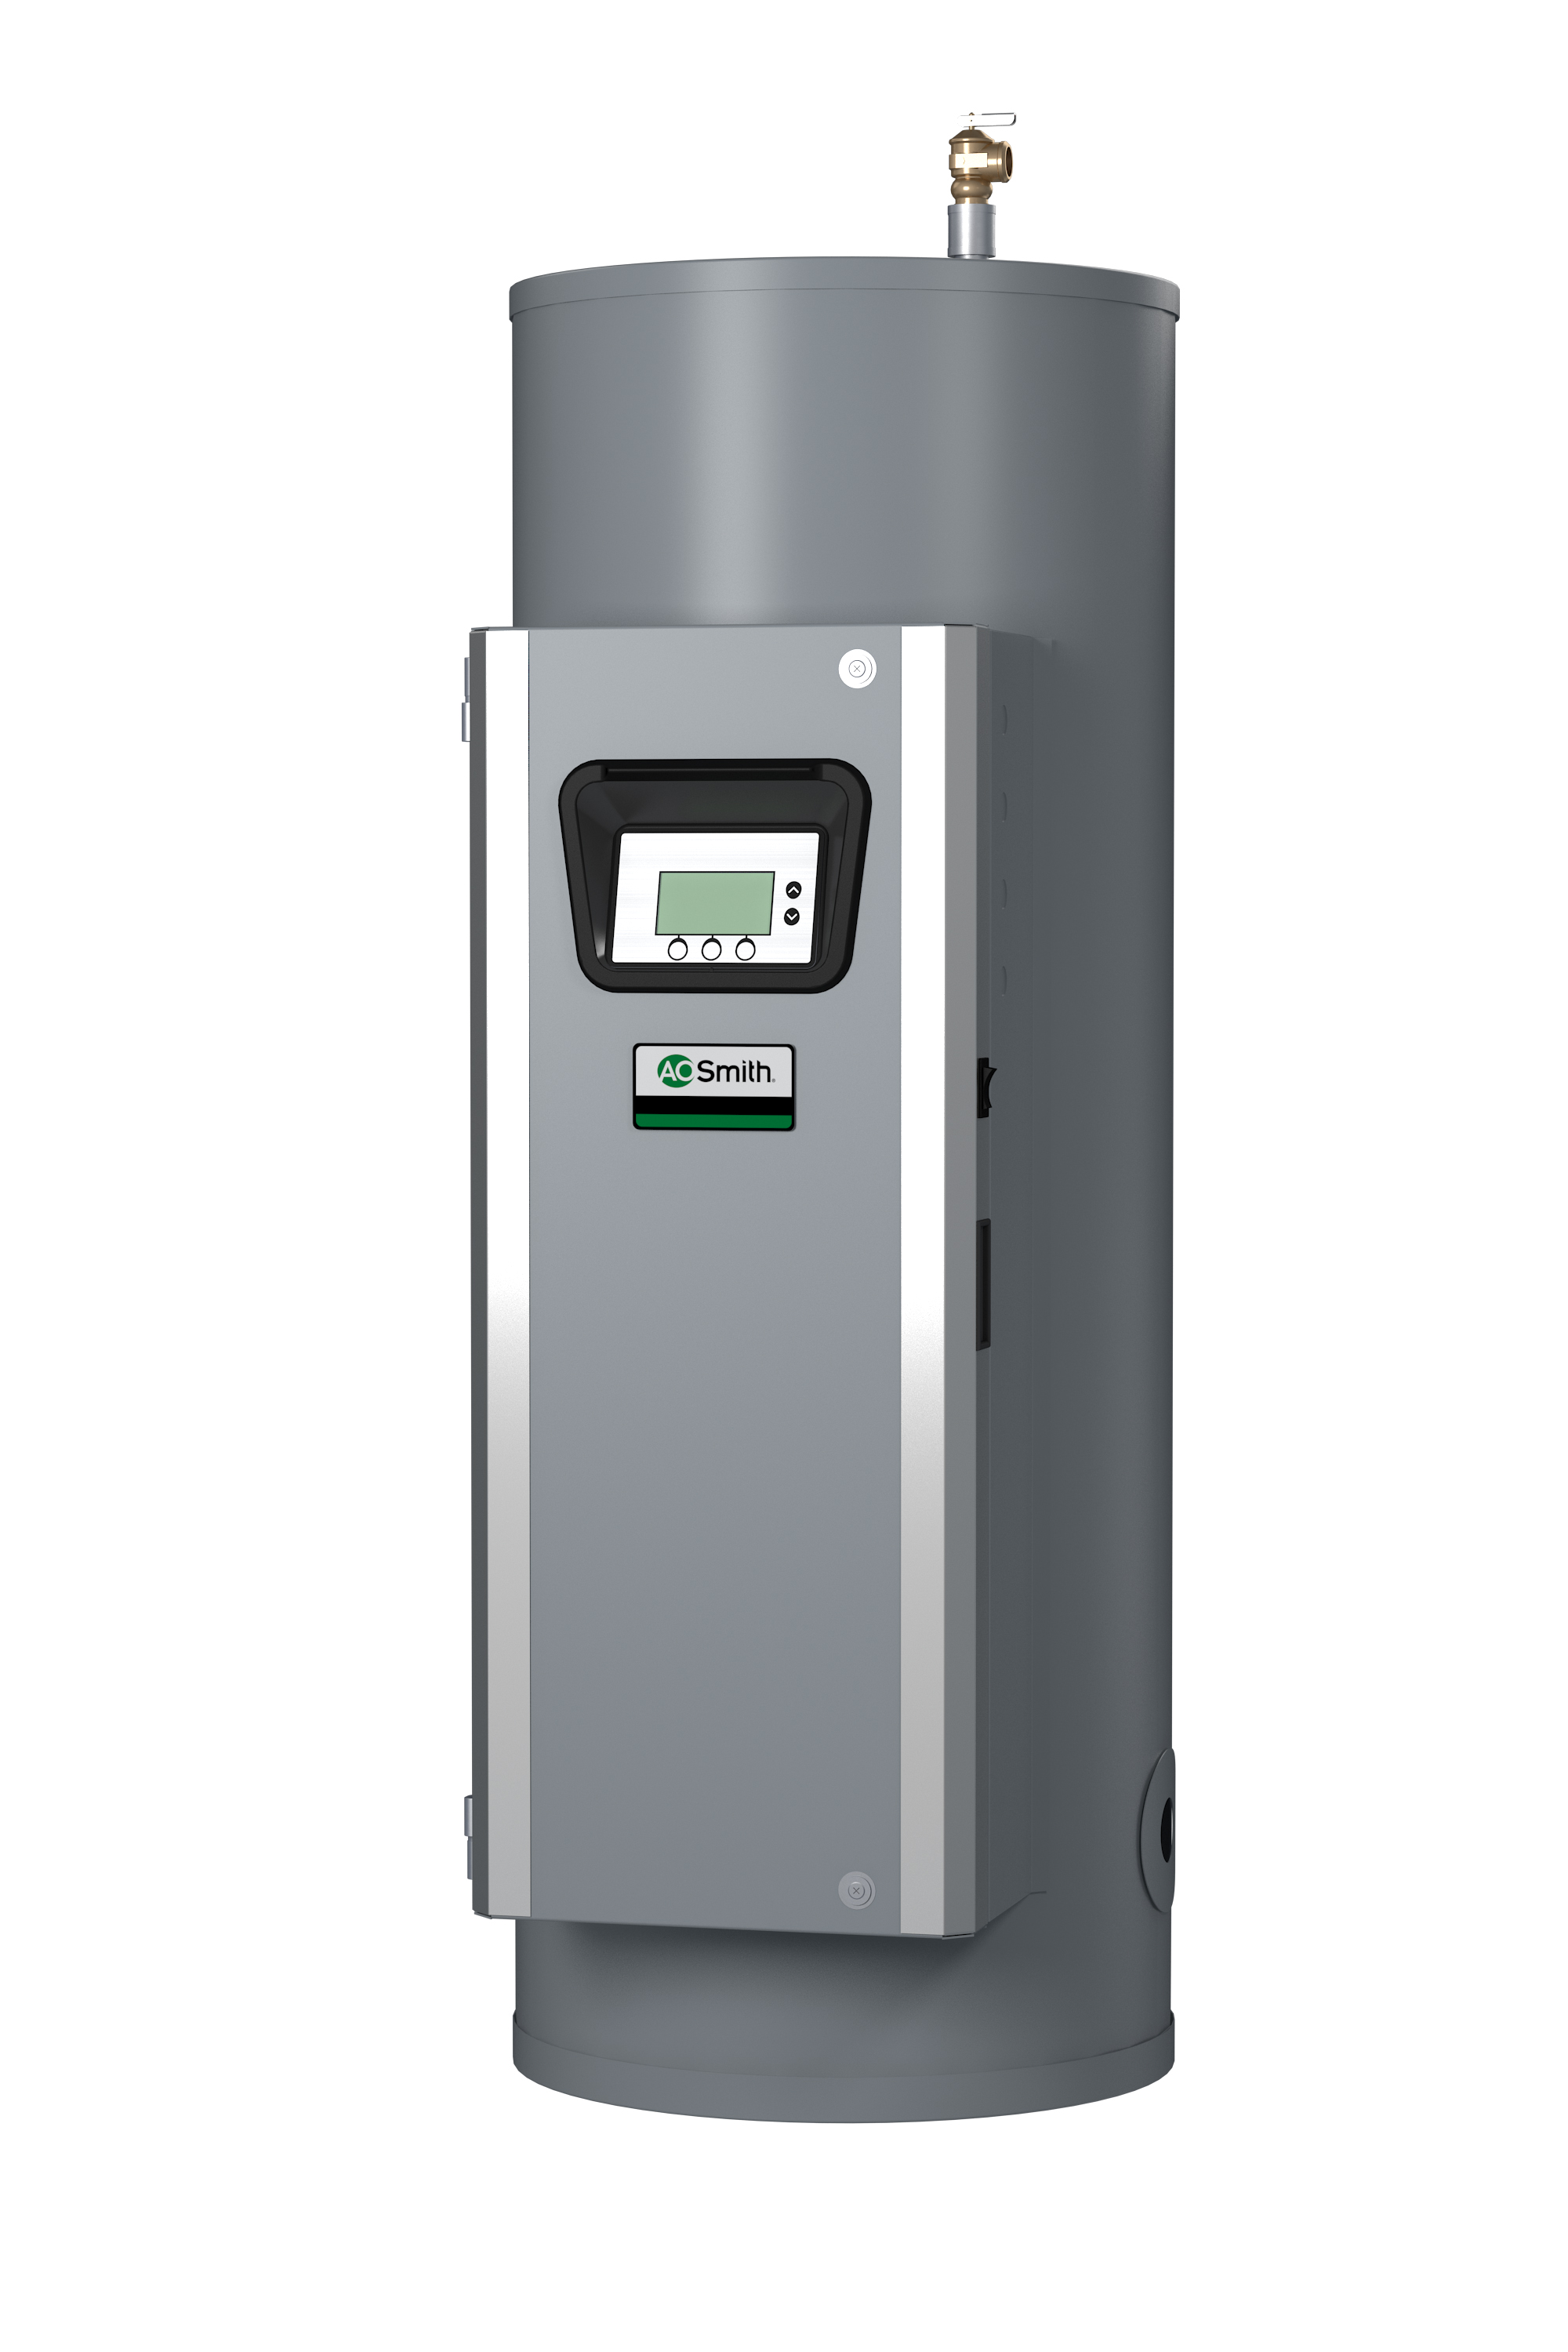 AO SMITH DSE-120A-90: 120 GALLONS, 90KW, 208 VOLT, 250 AMPS, 3 PHASE, 5 ELEMENTS, ASME CUSTOM Xi SERIES HEAVY DUTY COMMERCIAL ELECTRIC WATER HEATER